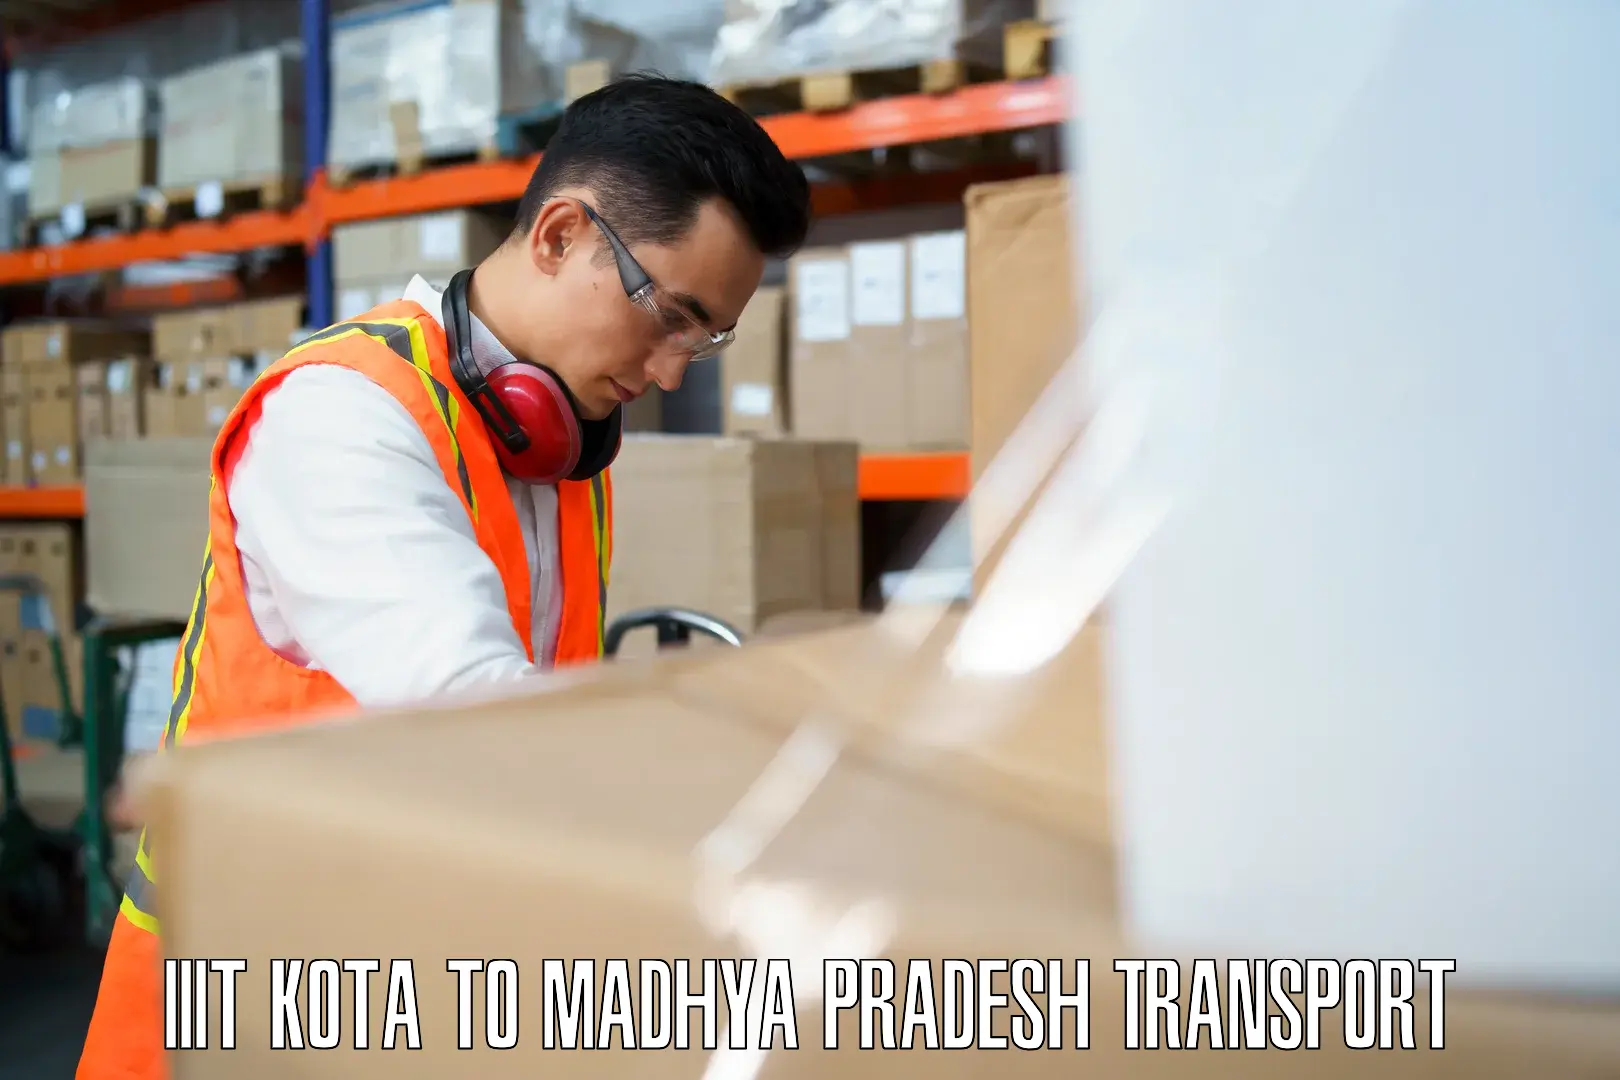 Daily parcel service transport IIIT Kota to Bhopal